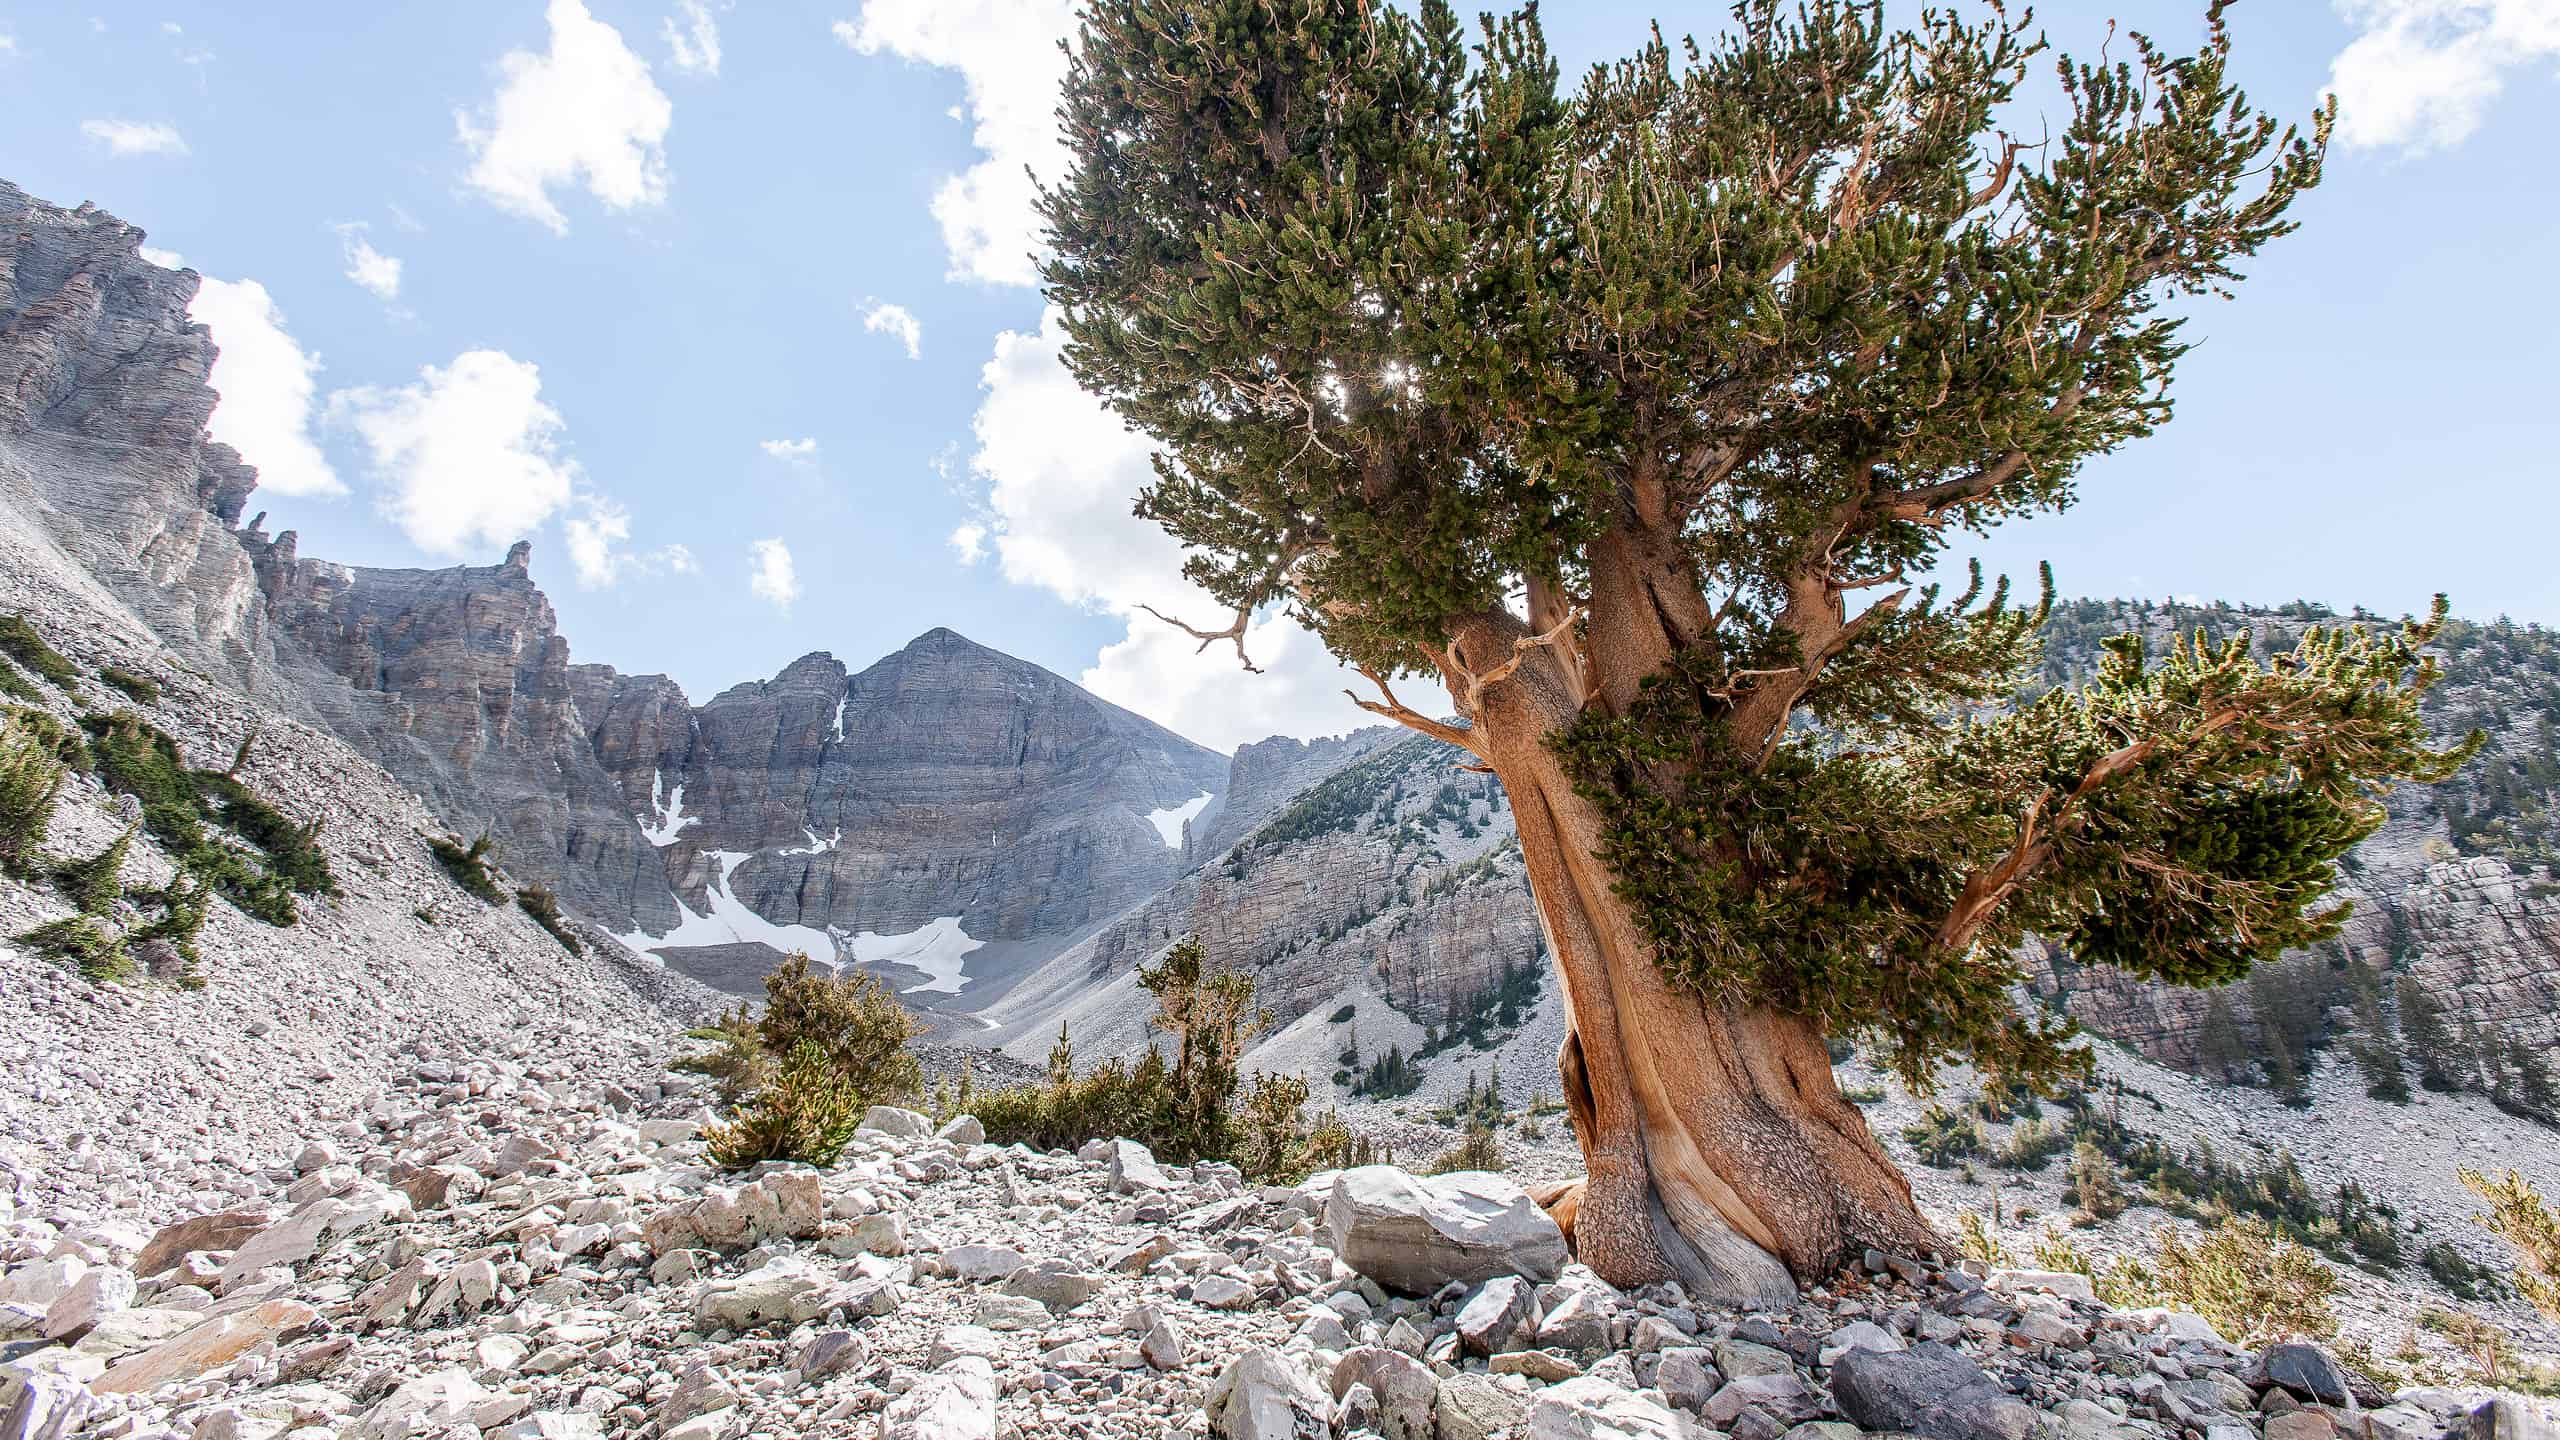 Landscape at Great Basin National Park, Nevada. Horizontal image shows a scenic view of Wheeler Peak. A large Bristlecone Pine tree in the foreground. A blue clouded sky above.